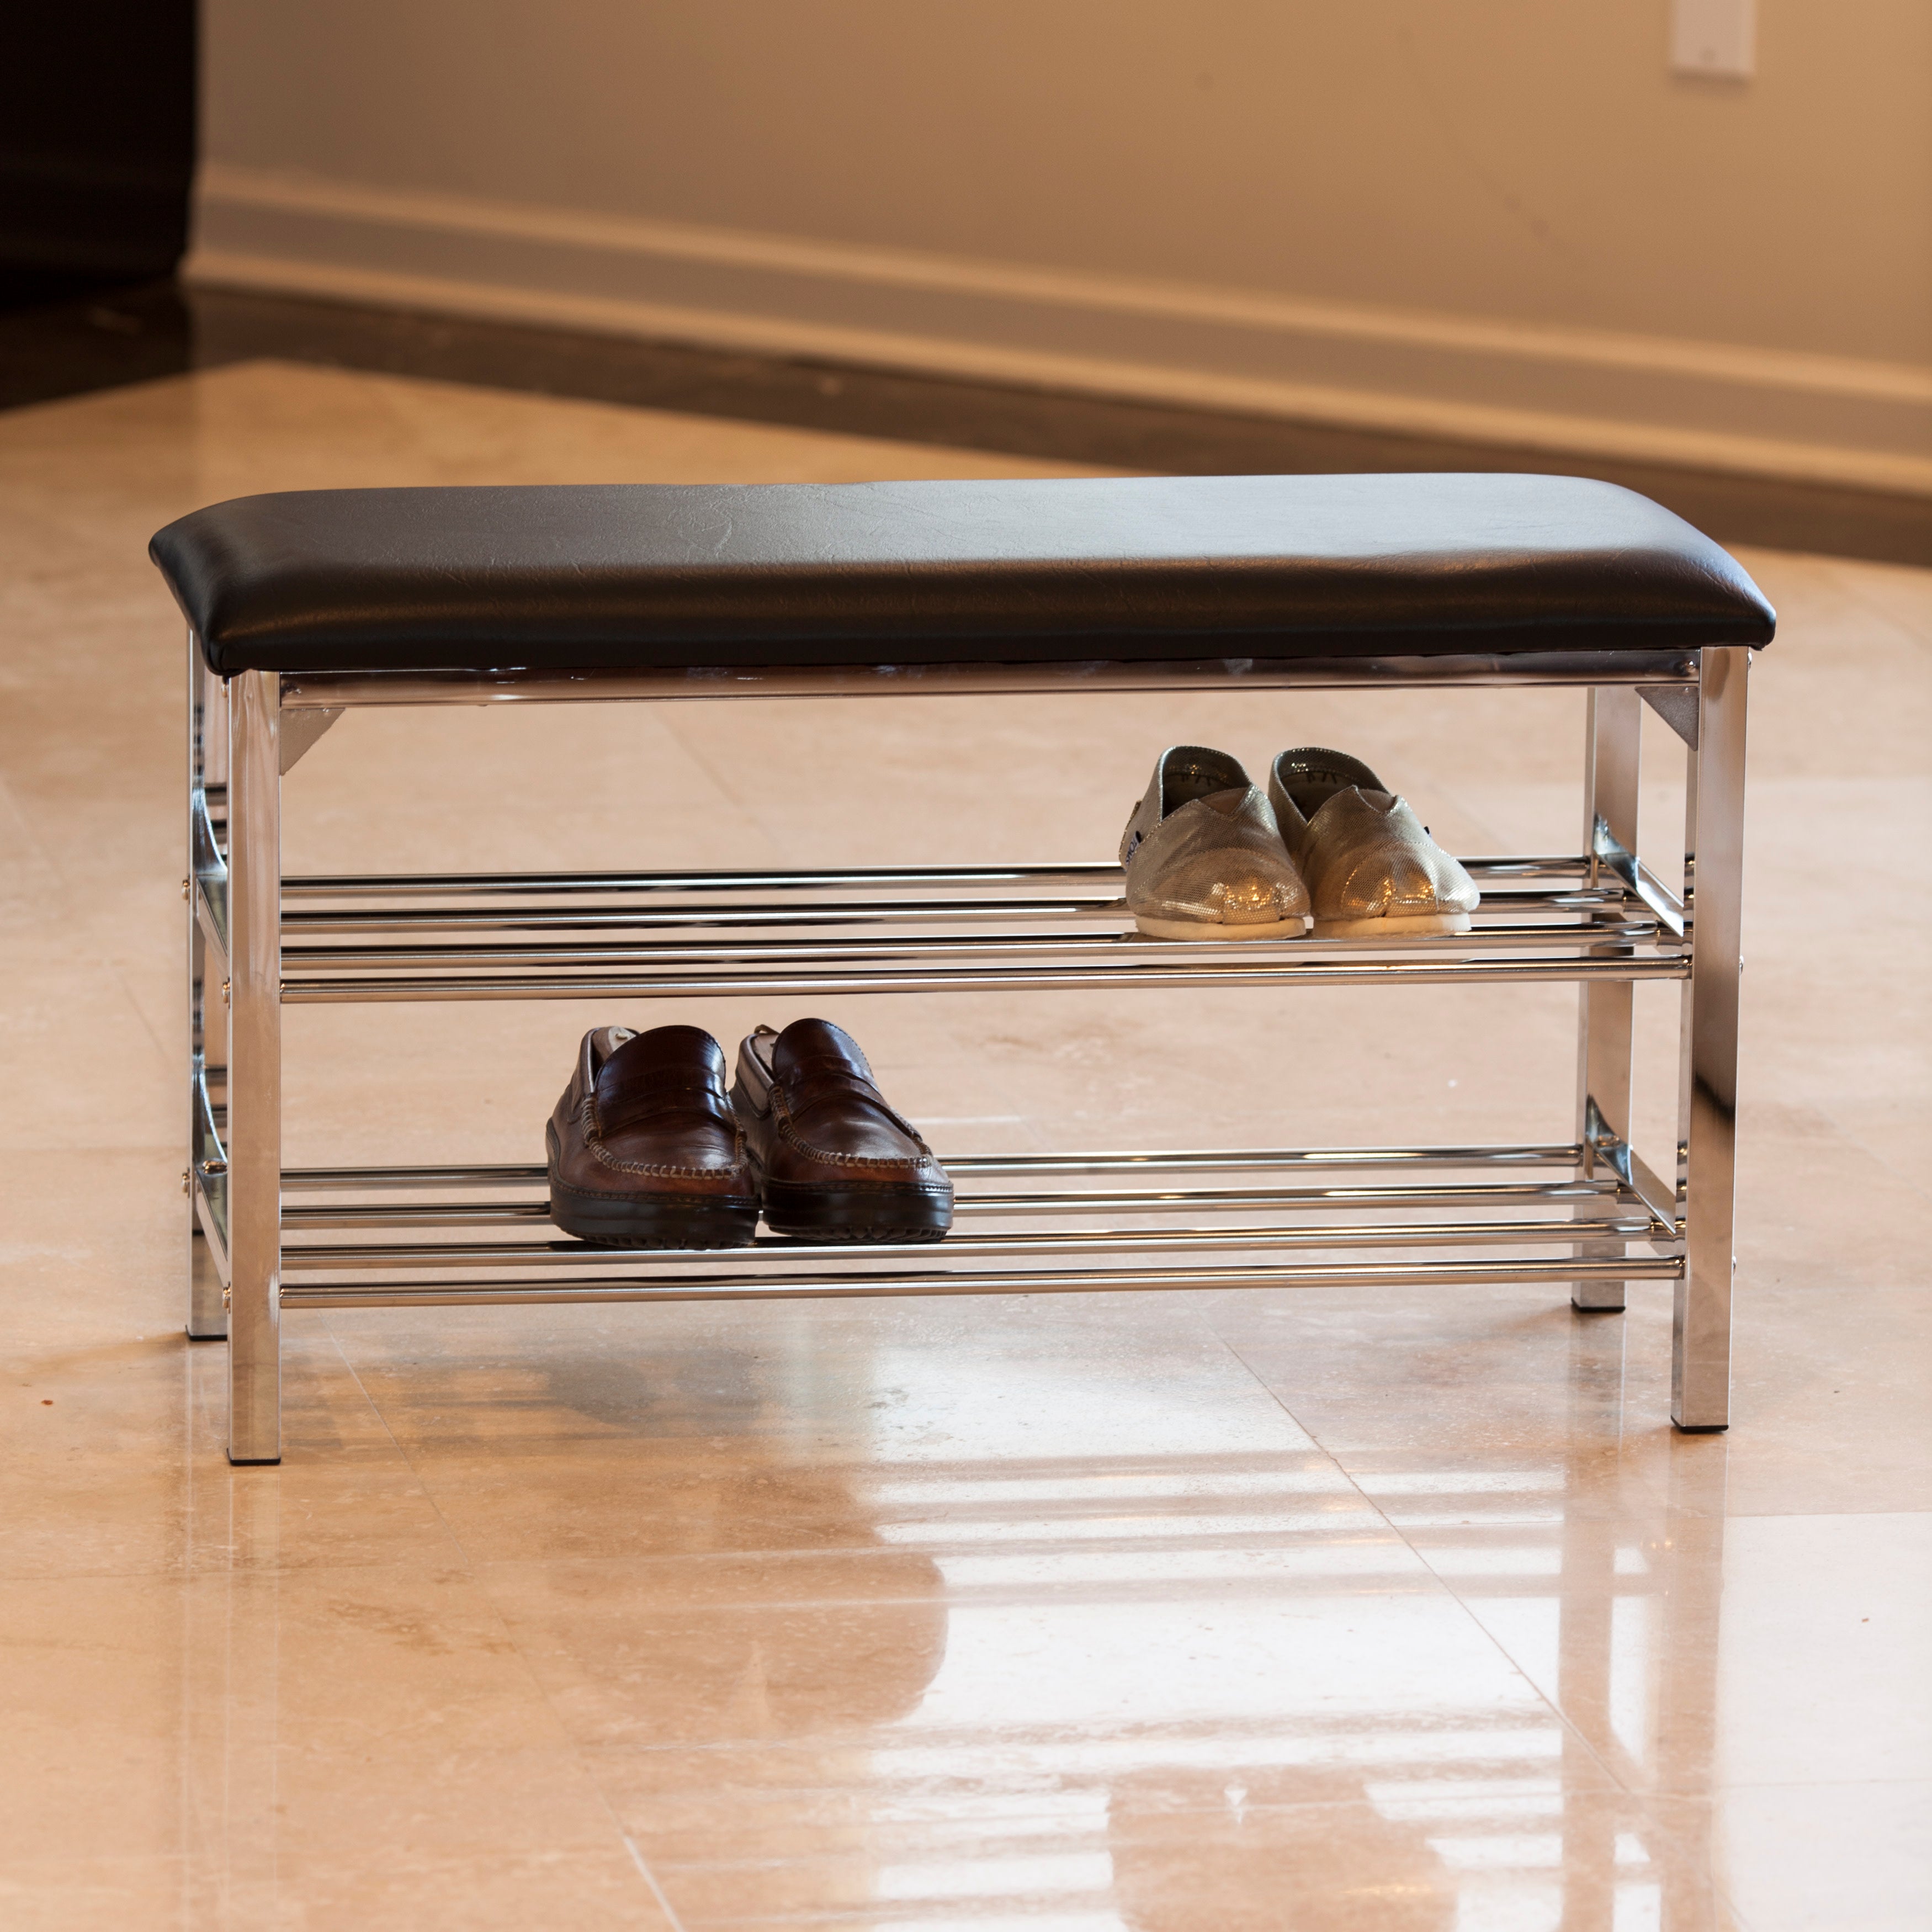 with Chrome – Leatherette Danya Storage Bench Black Frame Entryway